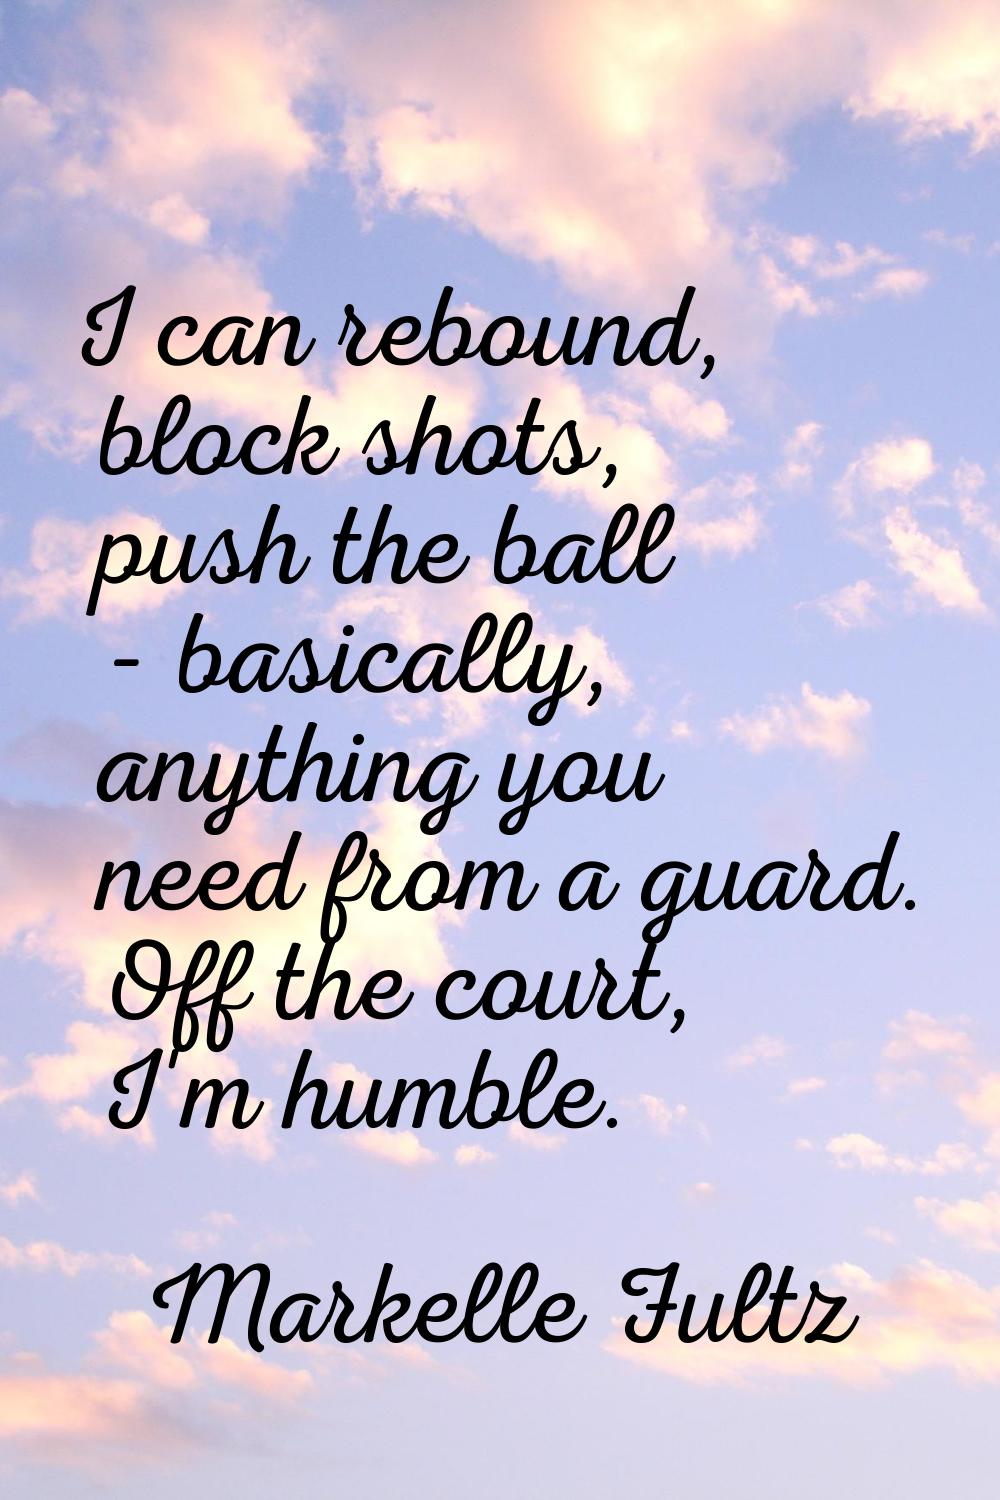 I can rebound, block shots, push the ball - basically, anything you need from a guard. Off the cour